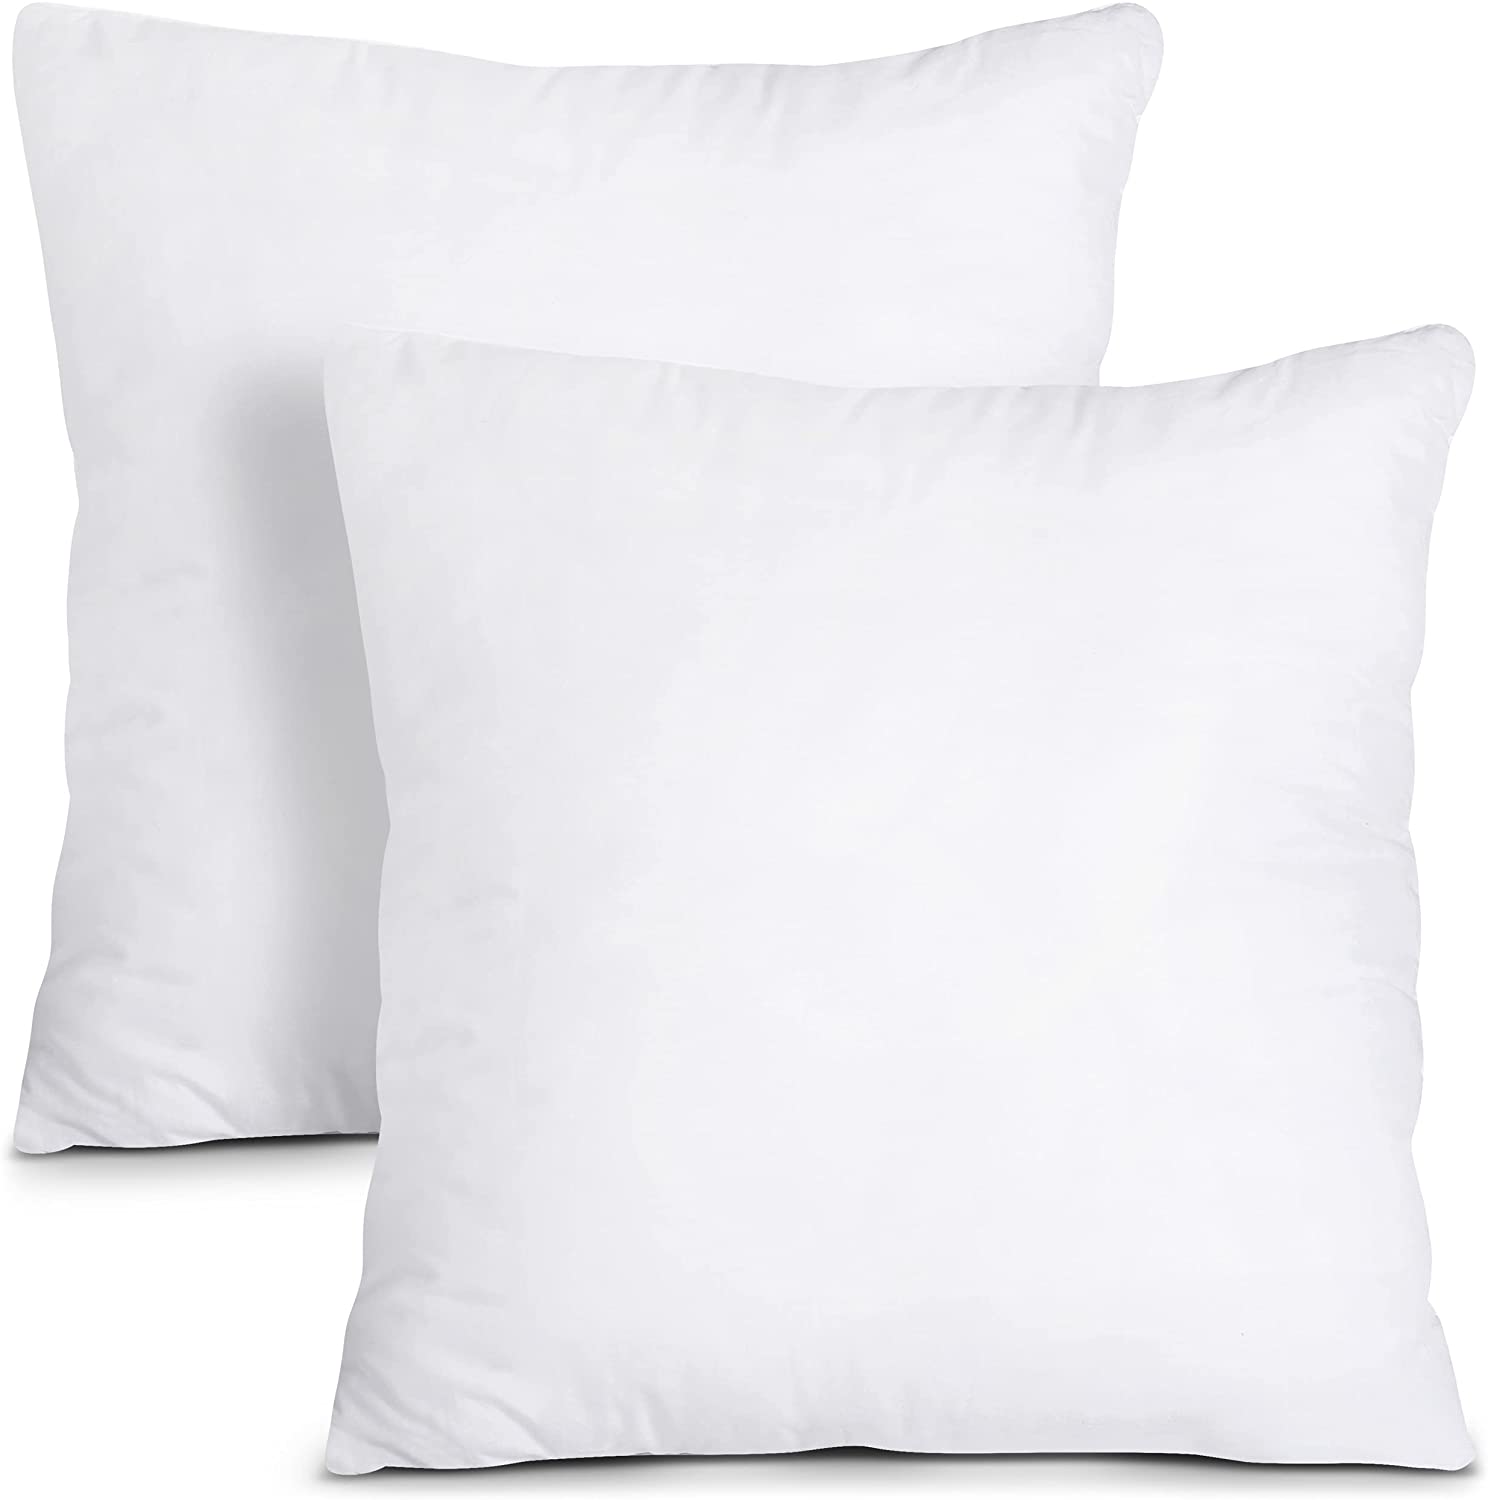 https://www.momjunction.com/wp-content/uploads/product-images/utopia-bedding-throw-pillow-inserts_afl106.jpg